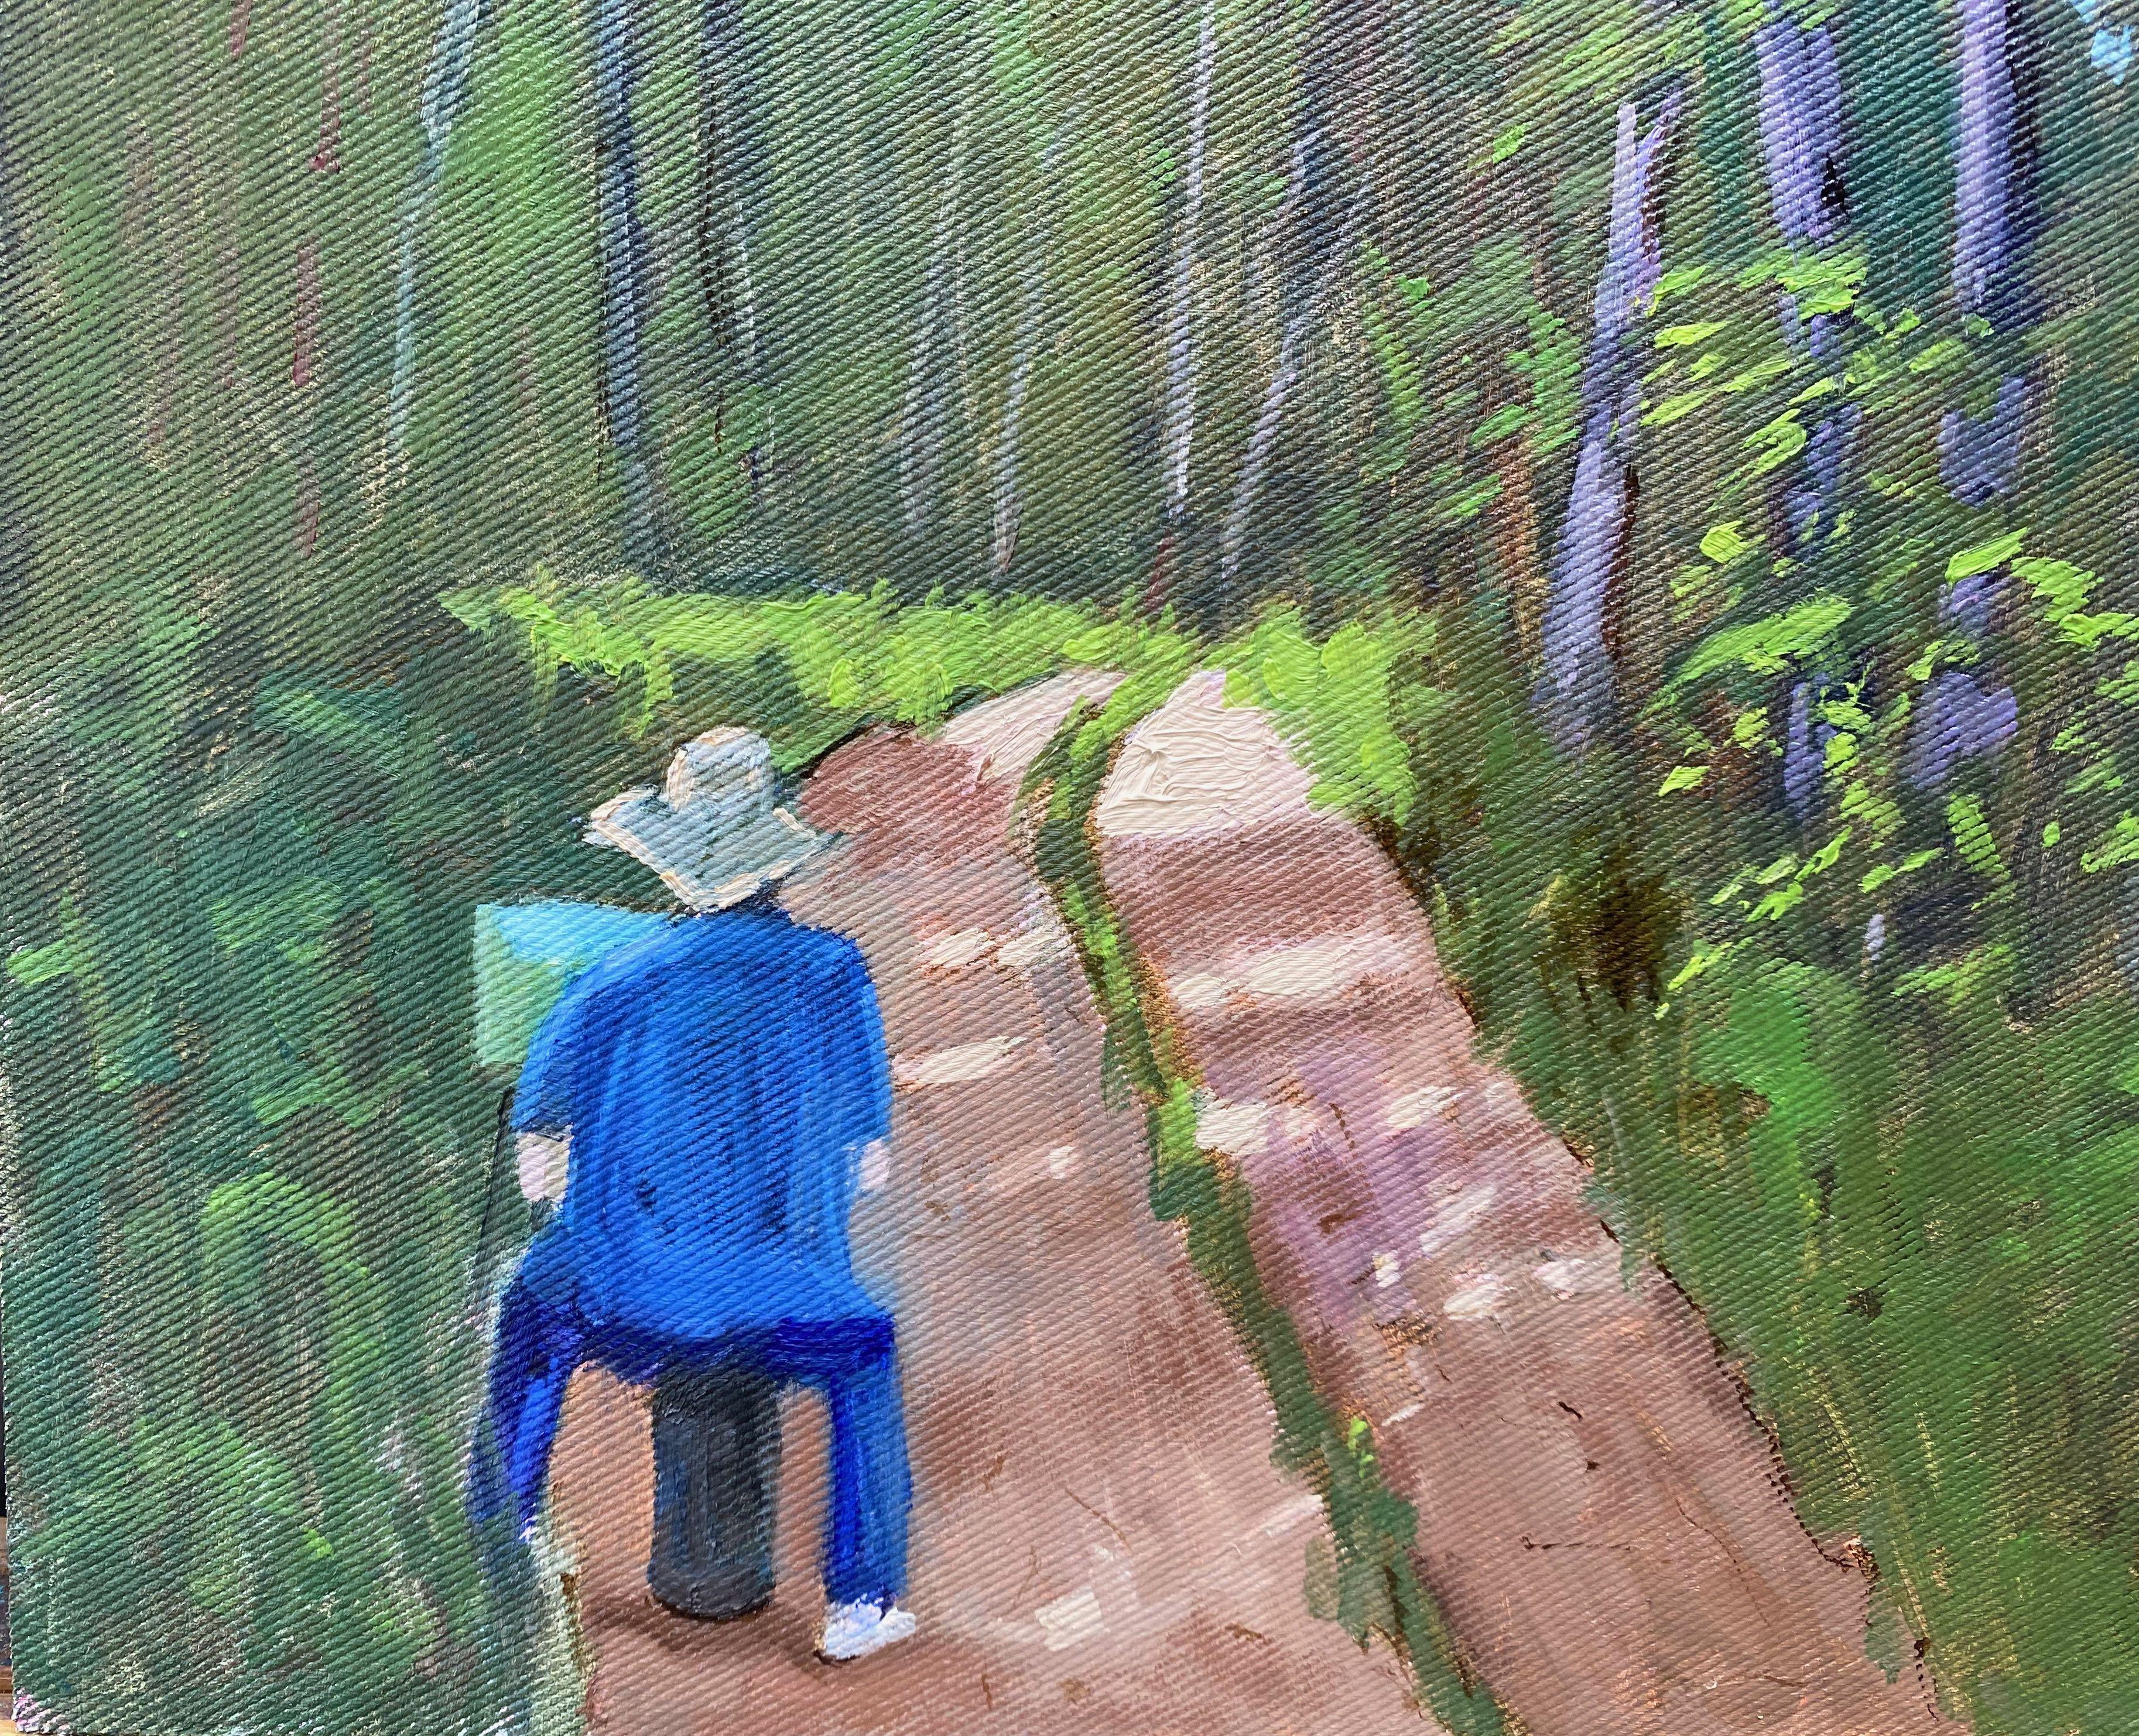 Plein air, Poland, 2022.  On the second day, I was in the forest with my painter colleague, and we painted together. She painted the forest path and I painted her painting. A beautiful, well-kept forest with old trees near our accommodation in